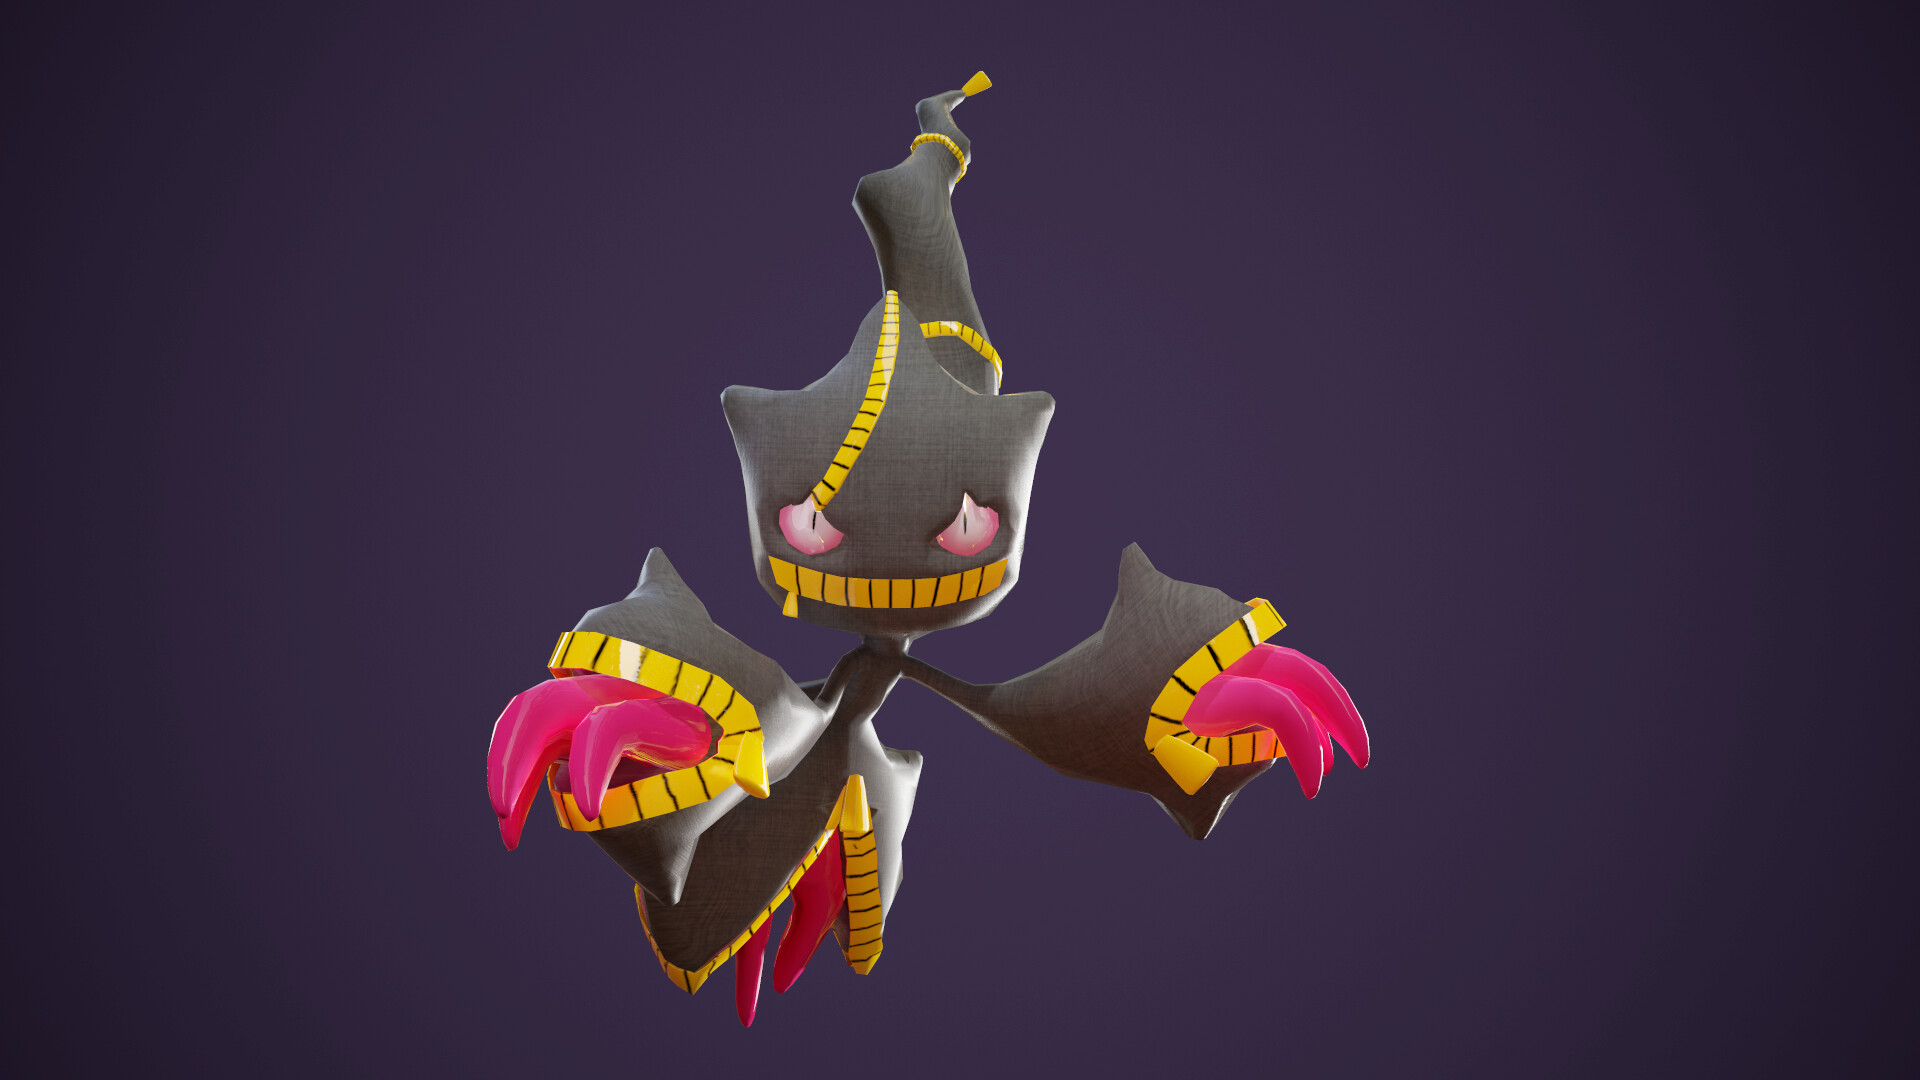 Banette Hd Wallpapers